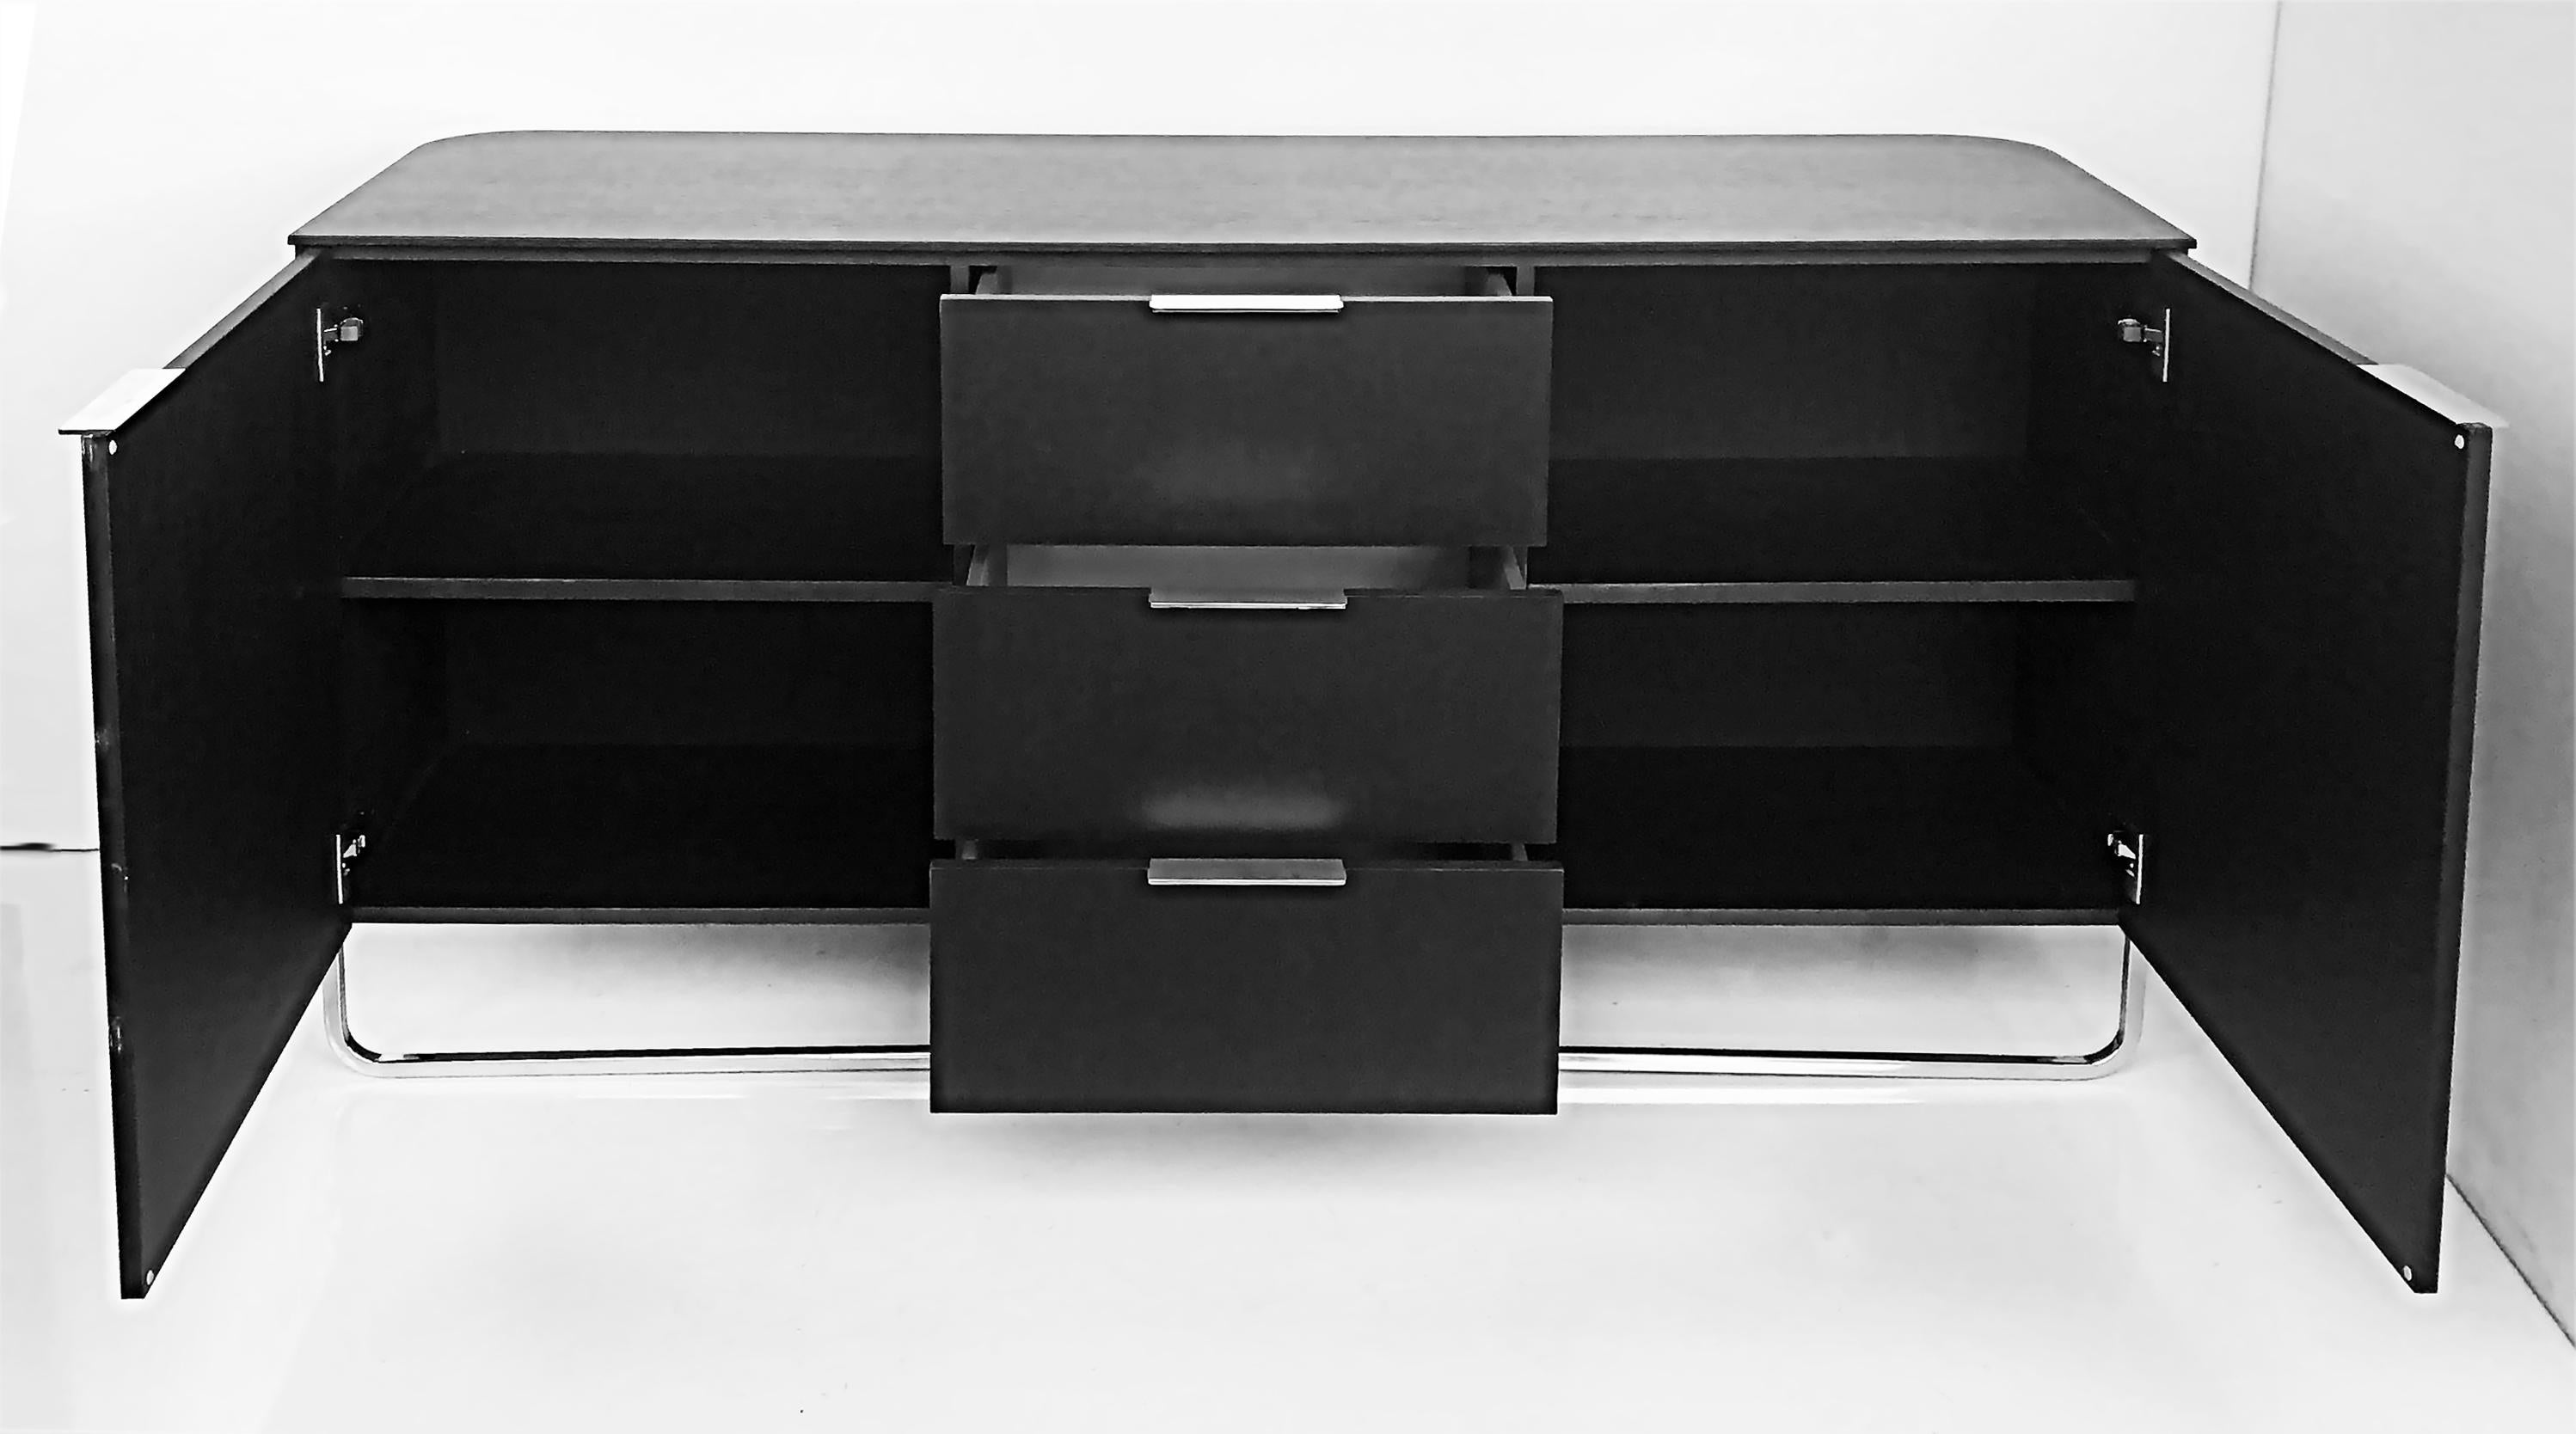 Contemporary Ebonized wood and chrome credenza, 2 doors flanking 3 drawers

Offered for sale is a contemporary ebonized wood and chrome credenza with two lateral doors which open to reveal shelves, flanking three drawers. This piece will work in a